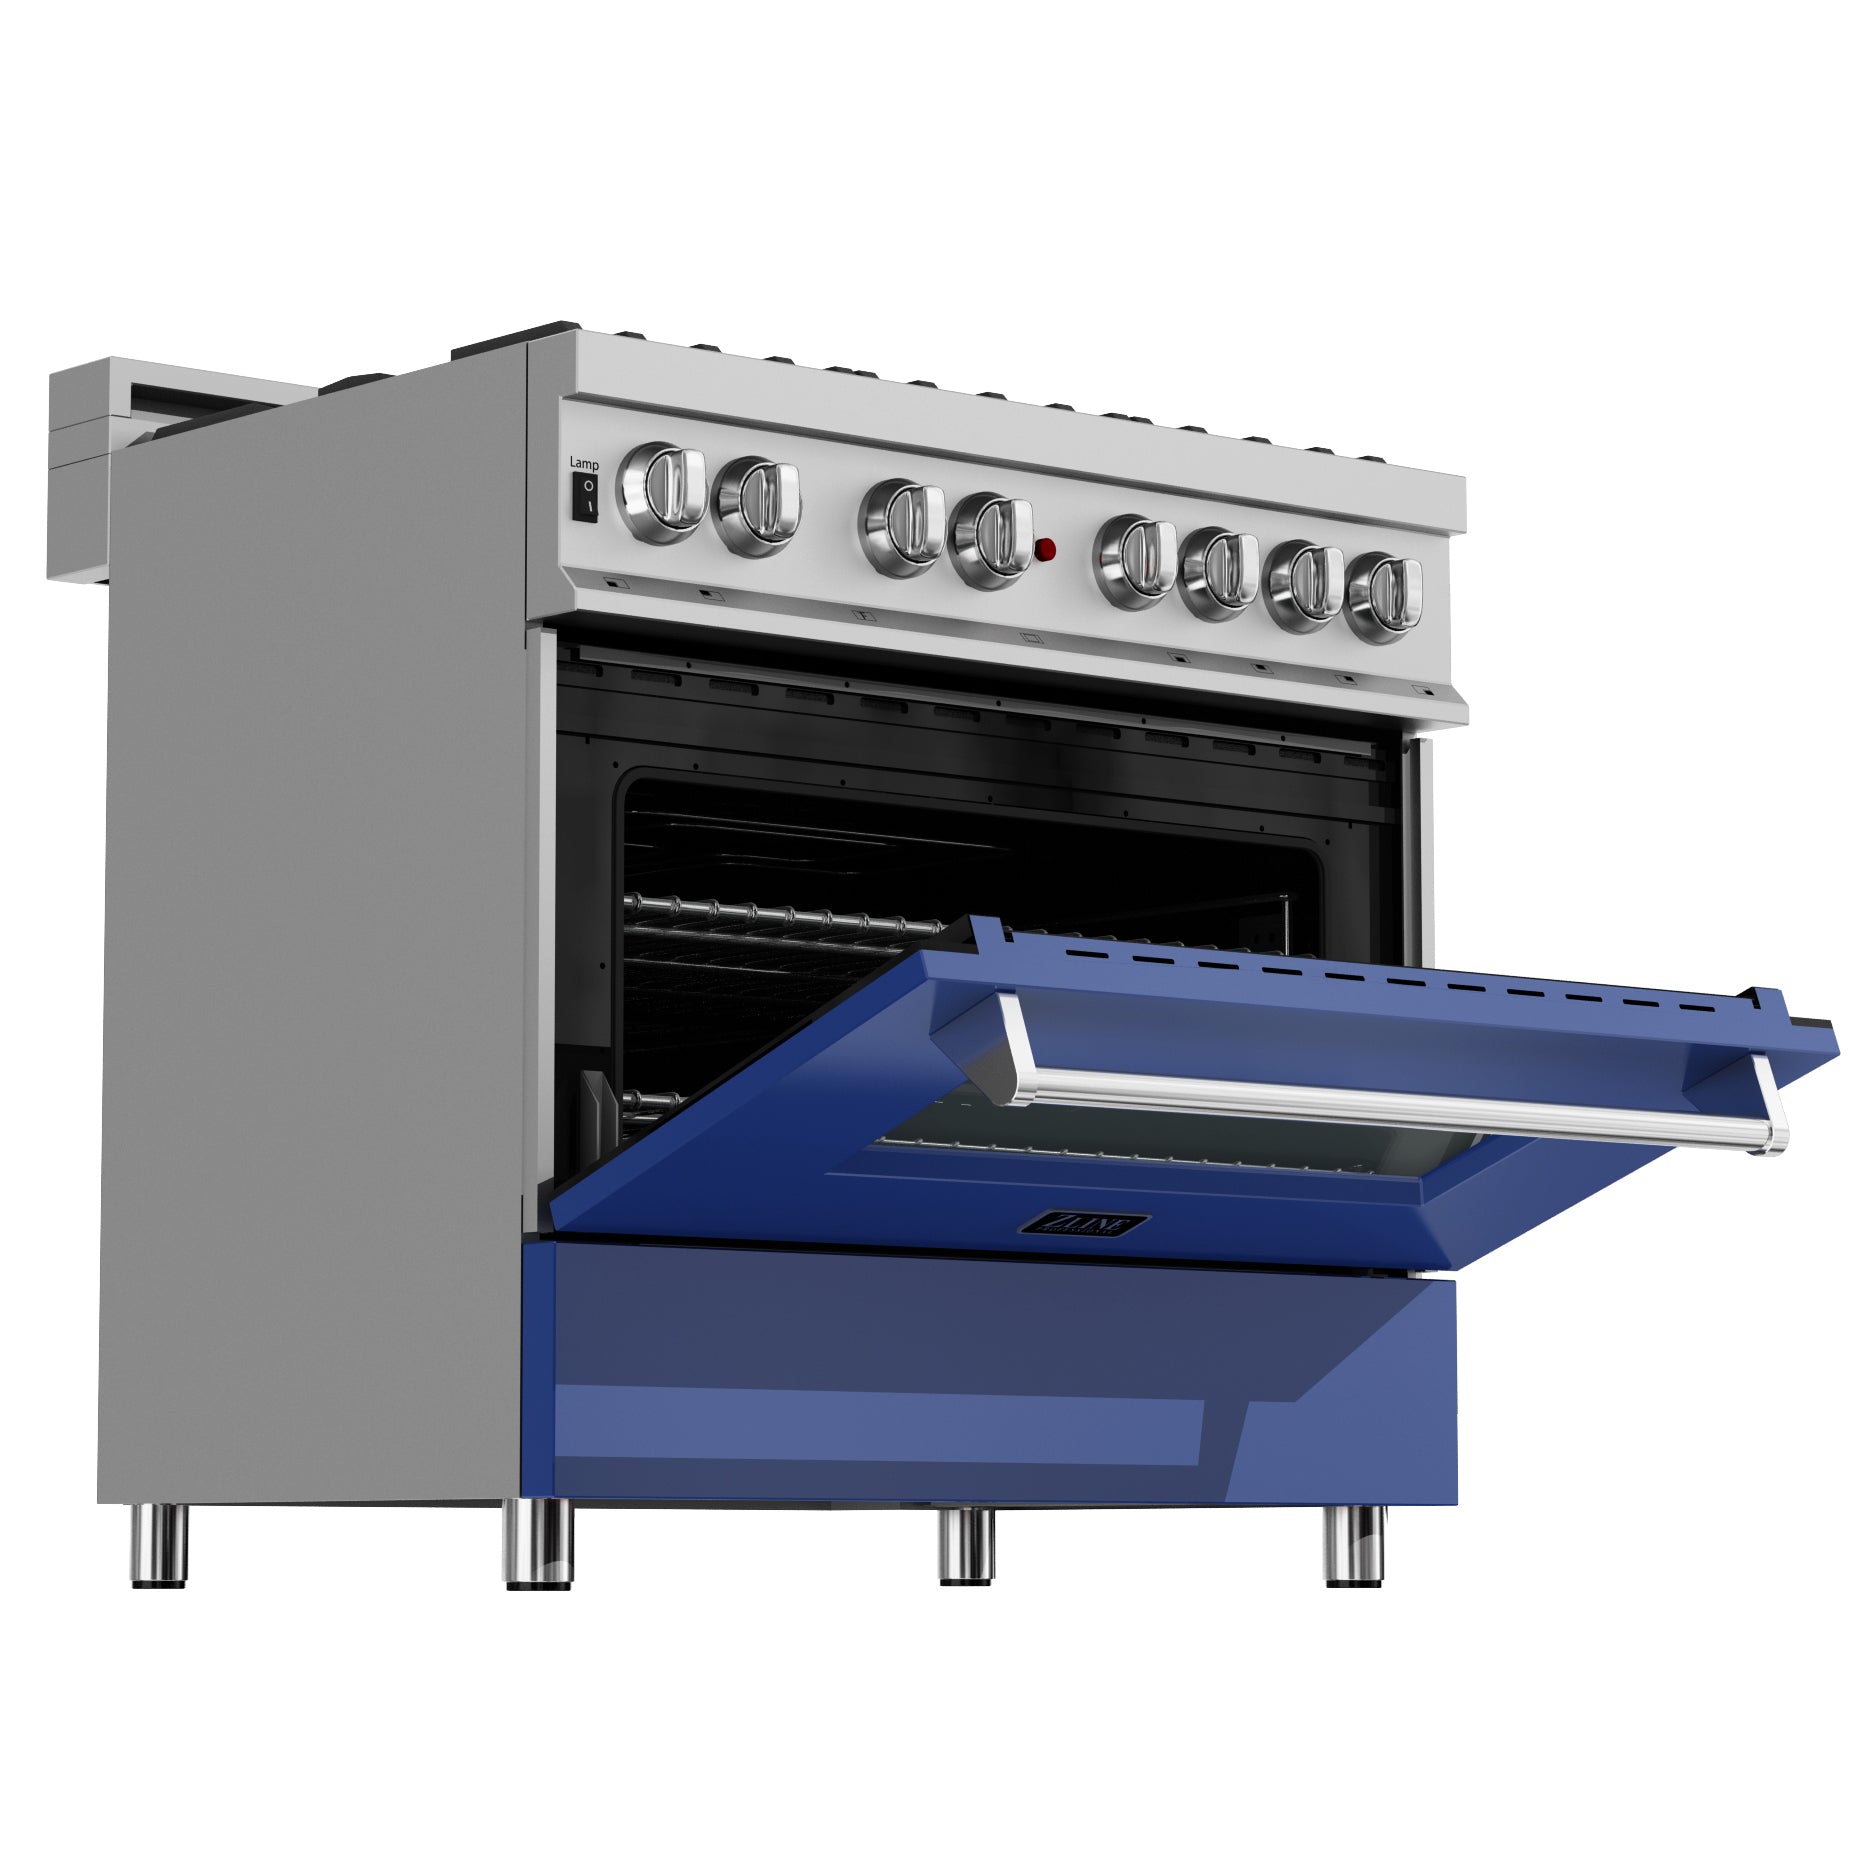 ZLINE 36" 4.6 cu. ft. Dual Fuel Range with Gas Stove and Electric Oven in Fingerprint Resistant Stainless Steel and Blue Matte Door (RAS-BM-36)